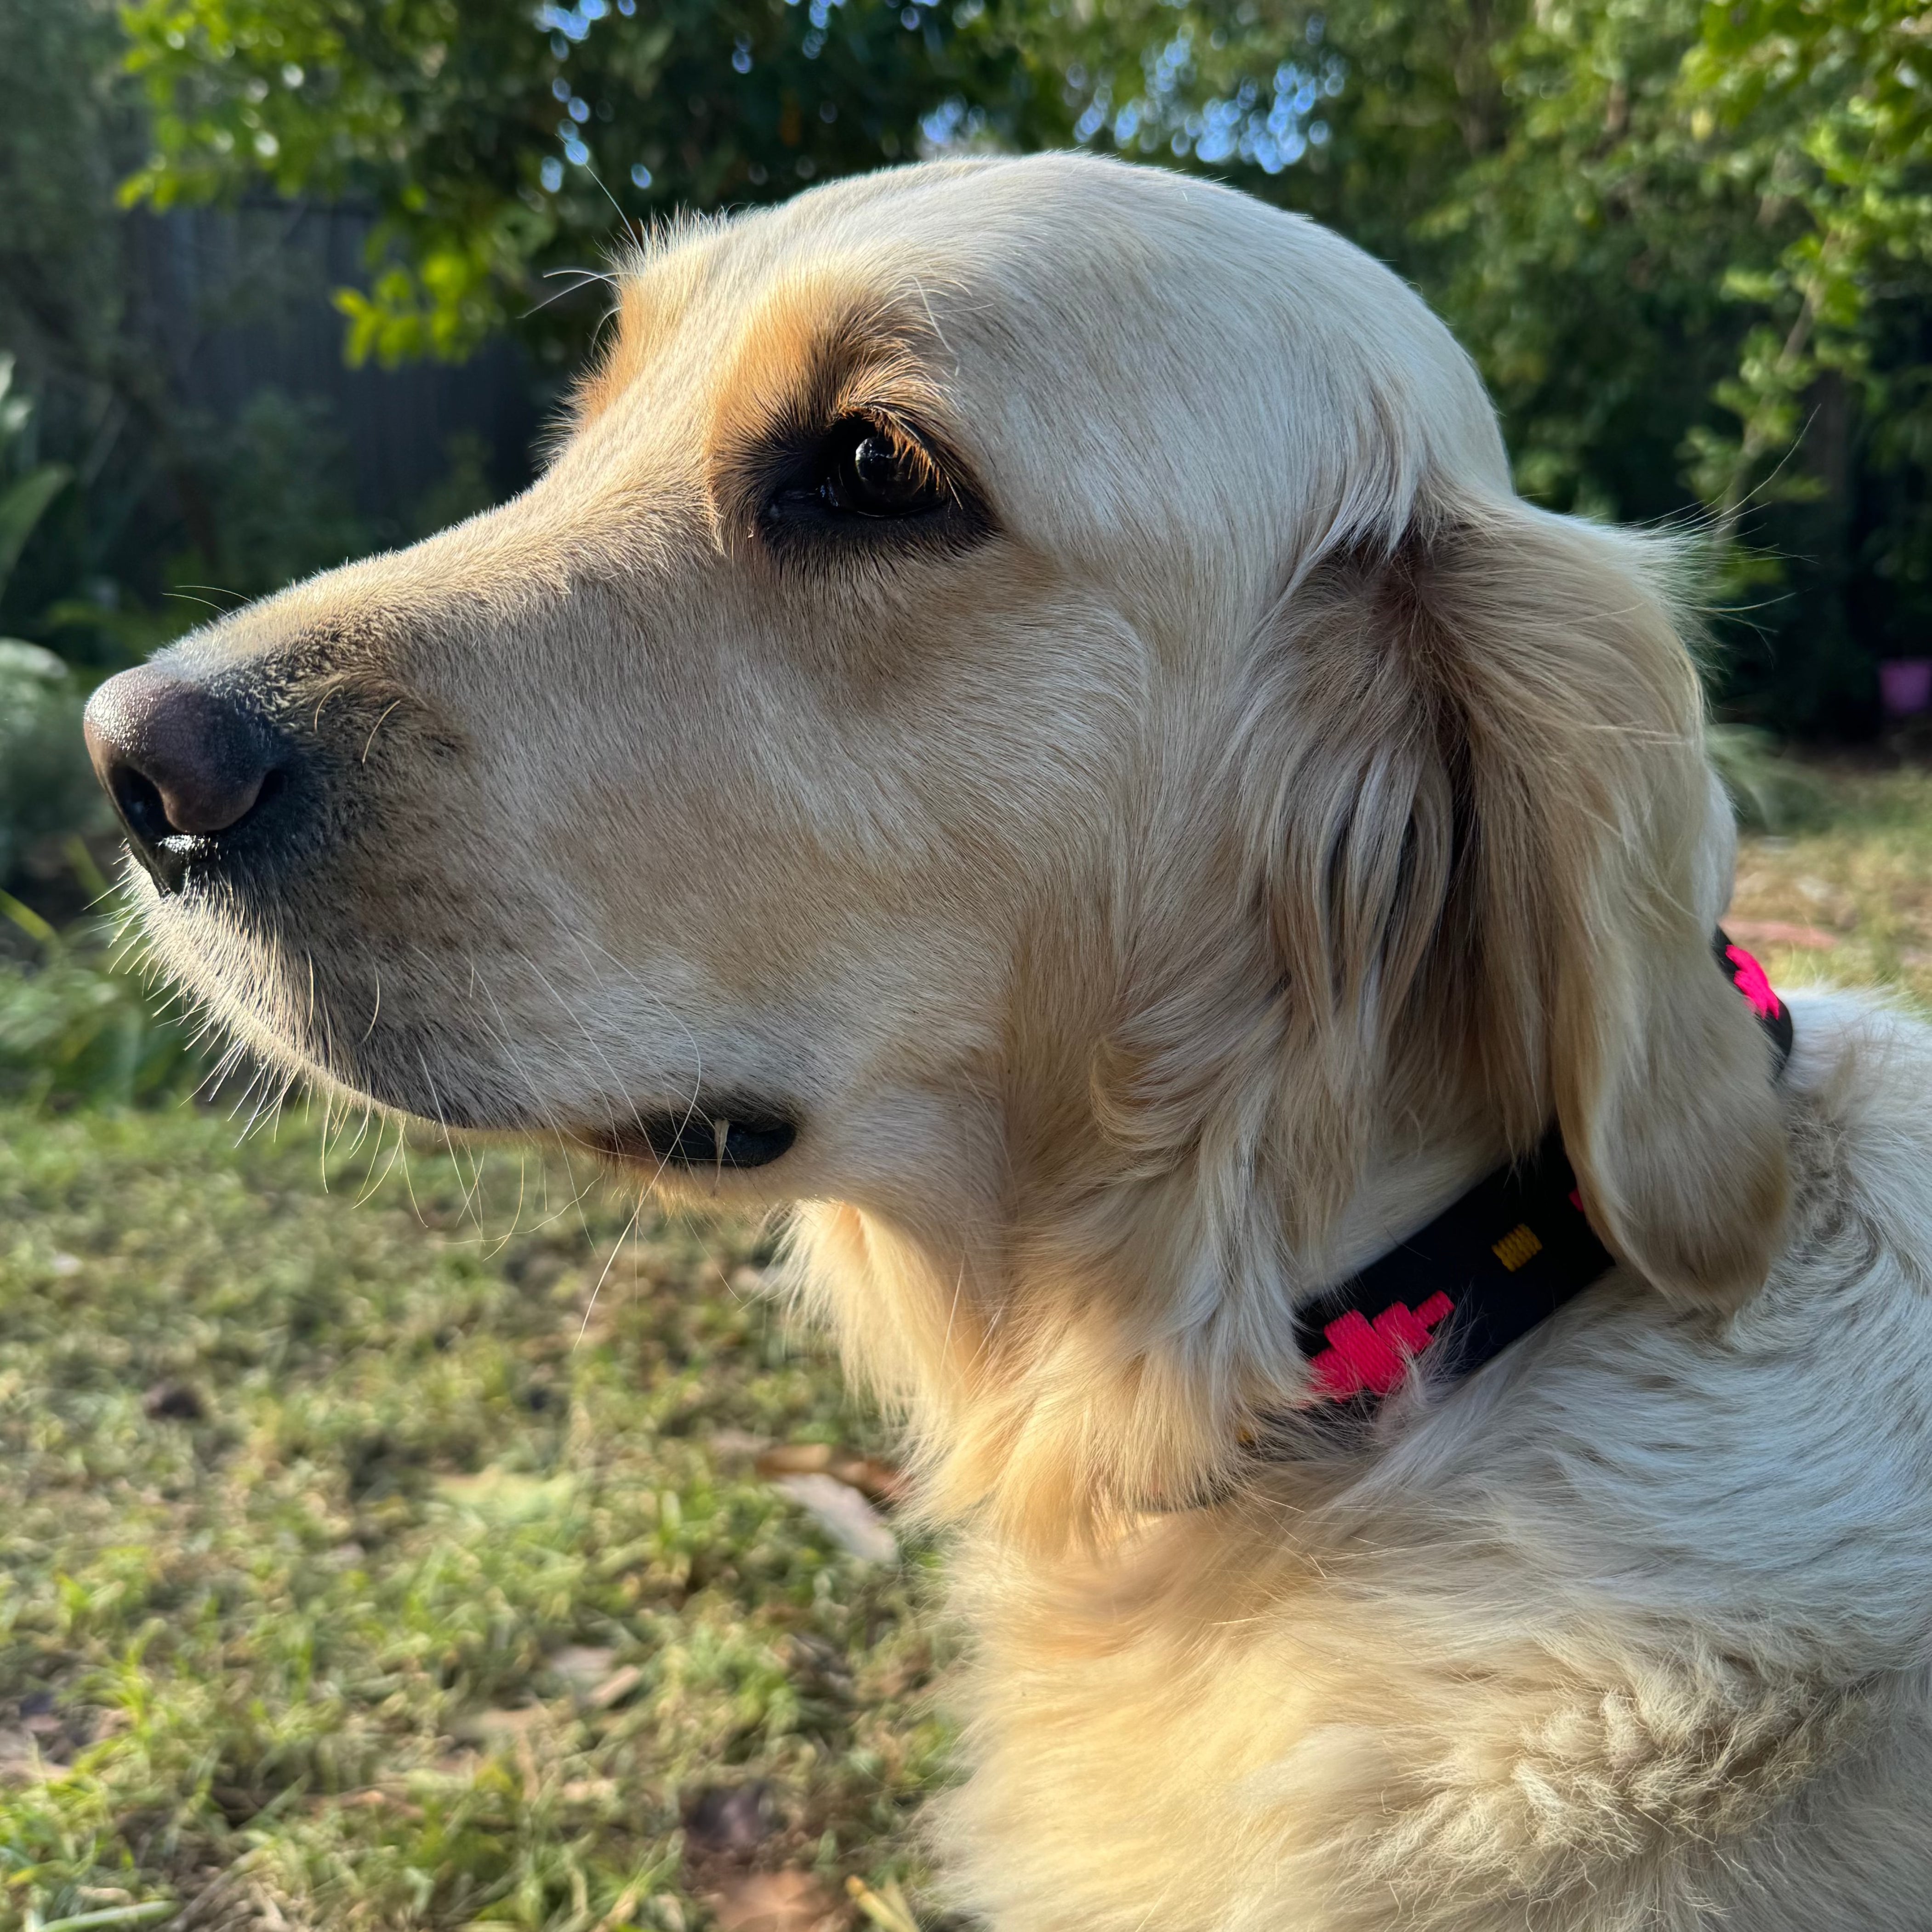 Close-up side profile of a golden retriever with a light-colored fur coat. The dog is wearing a Georgie Paws Polo Collar - Megsie adorned with neon pink designs and brass hardware. It stands on grass, with a blurred background of green trees and shrubs under a bright blue sky, suggesting a sunny day in the garden or yard.